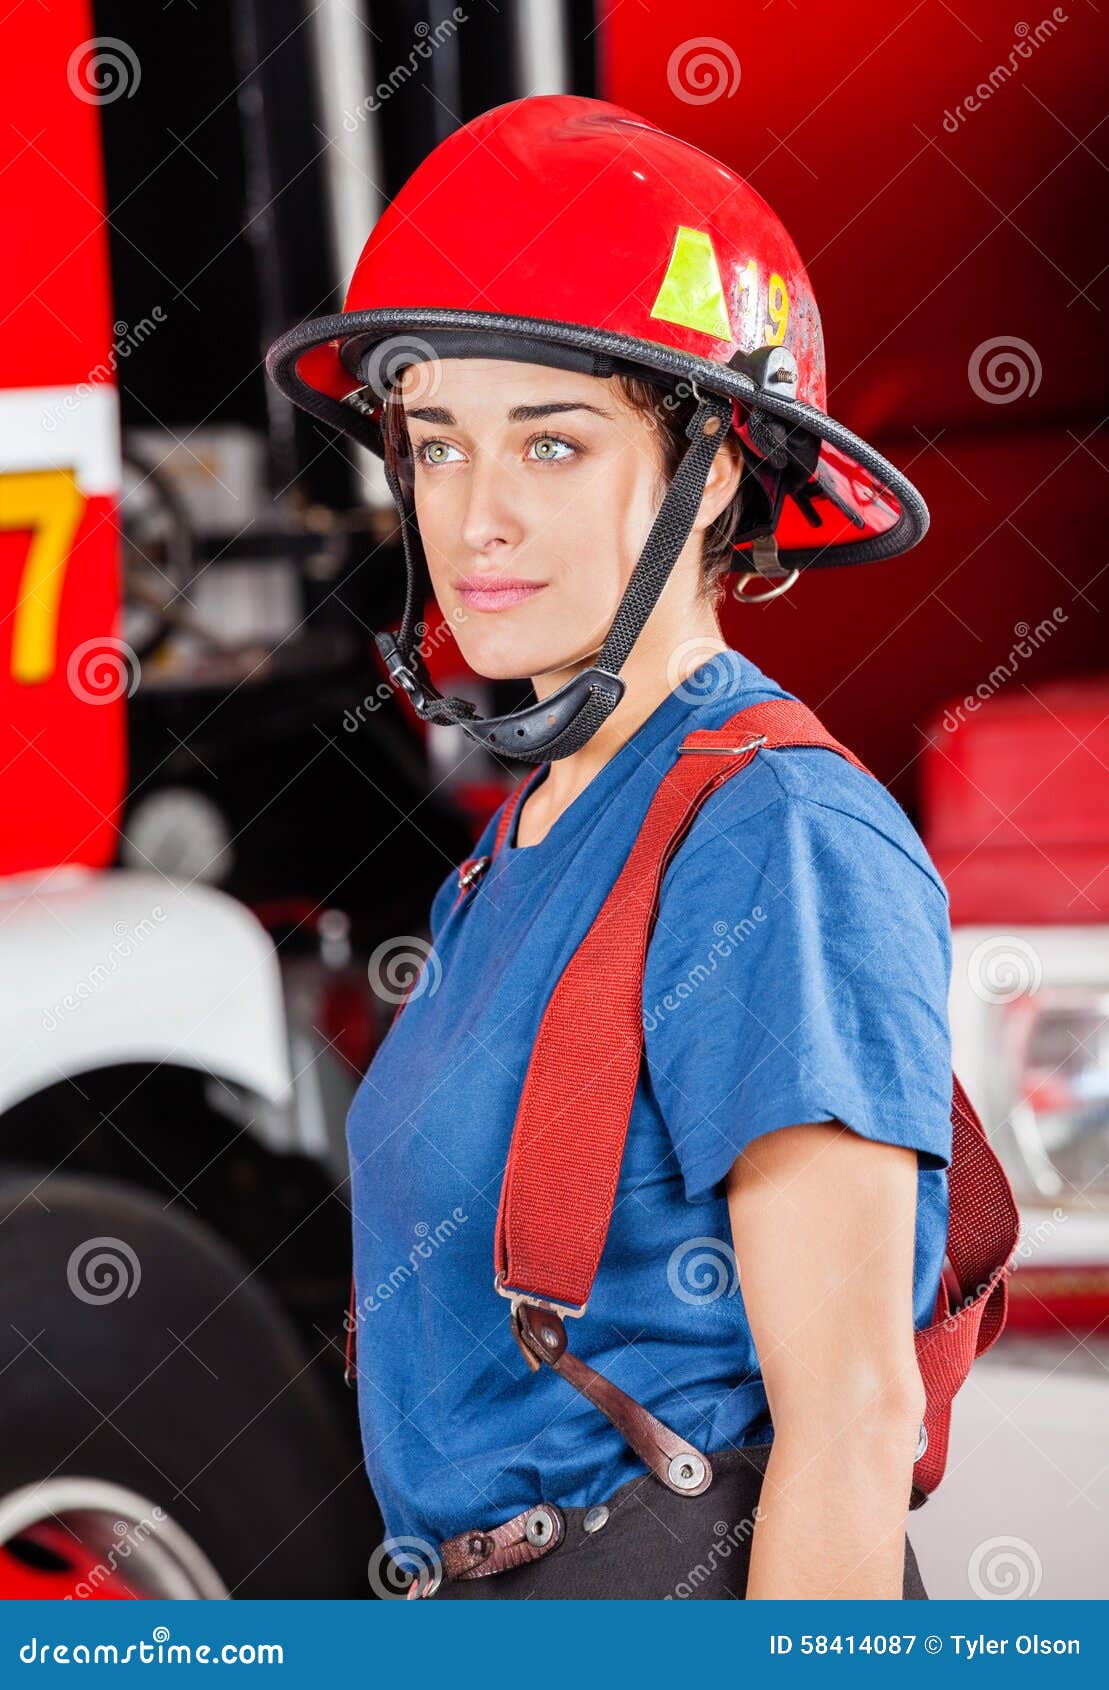 Confident Firewoman In Red Helmet Standing Against Stock Image Image